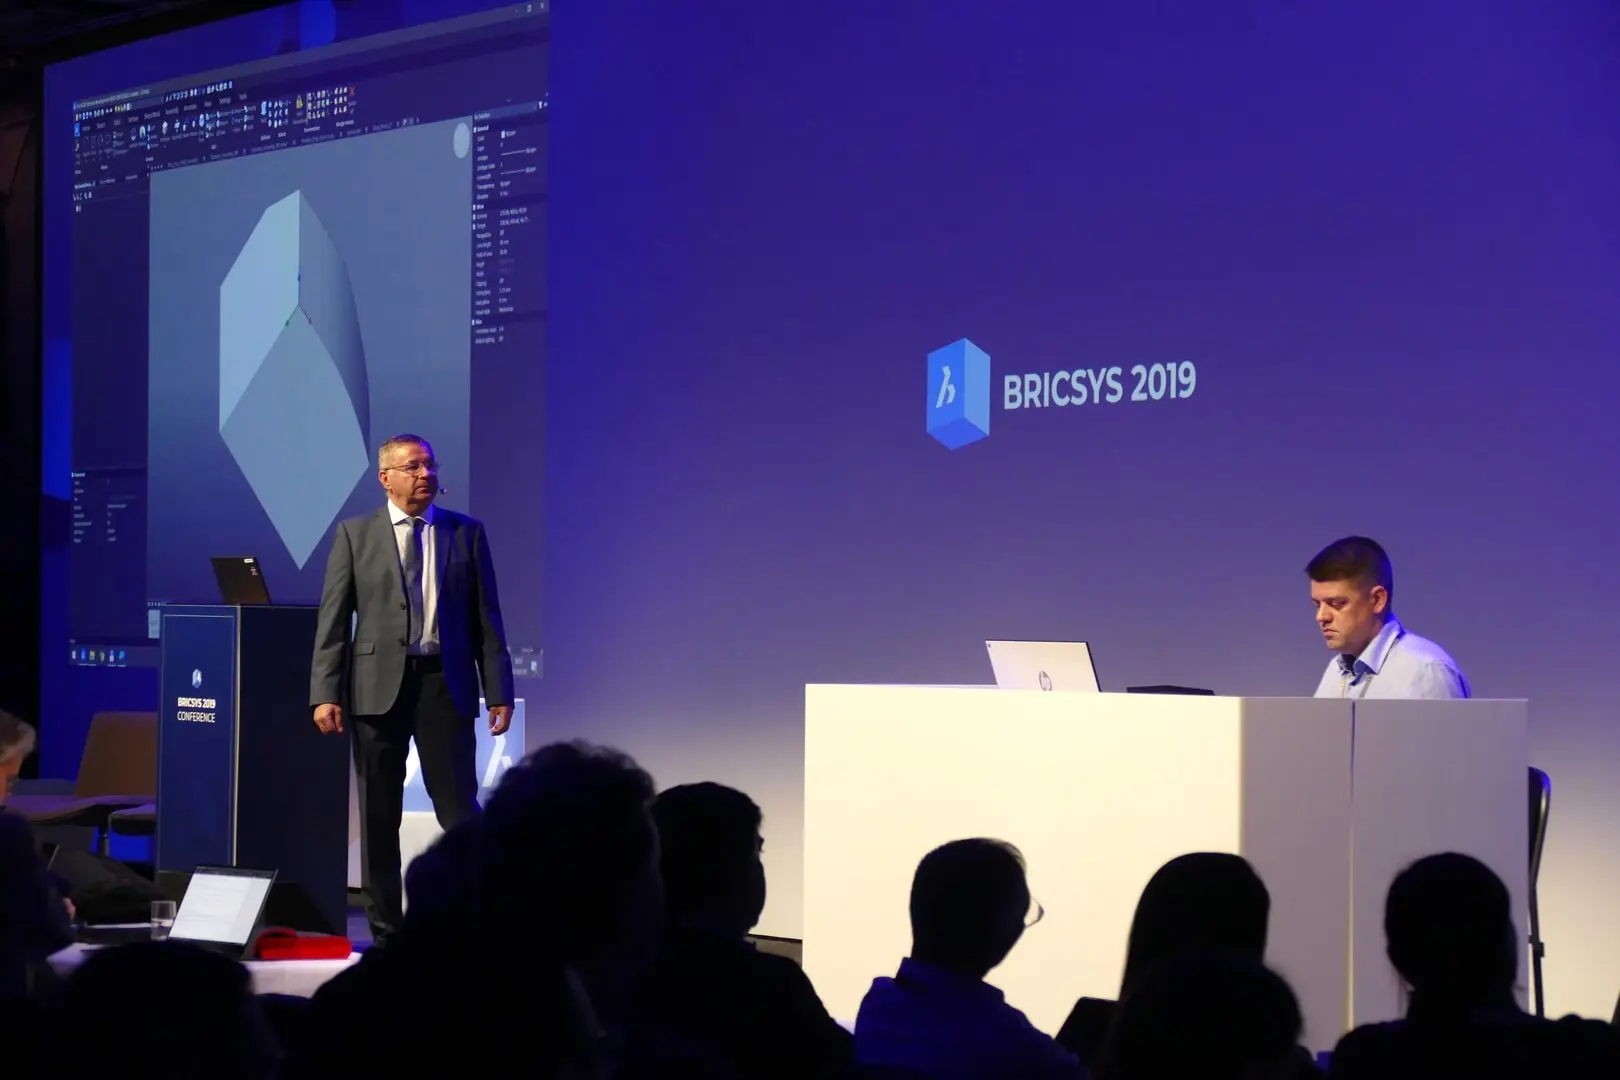 This was Bricsys Conference 2019- 20191010 095719